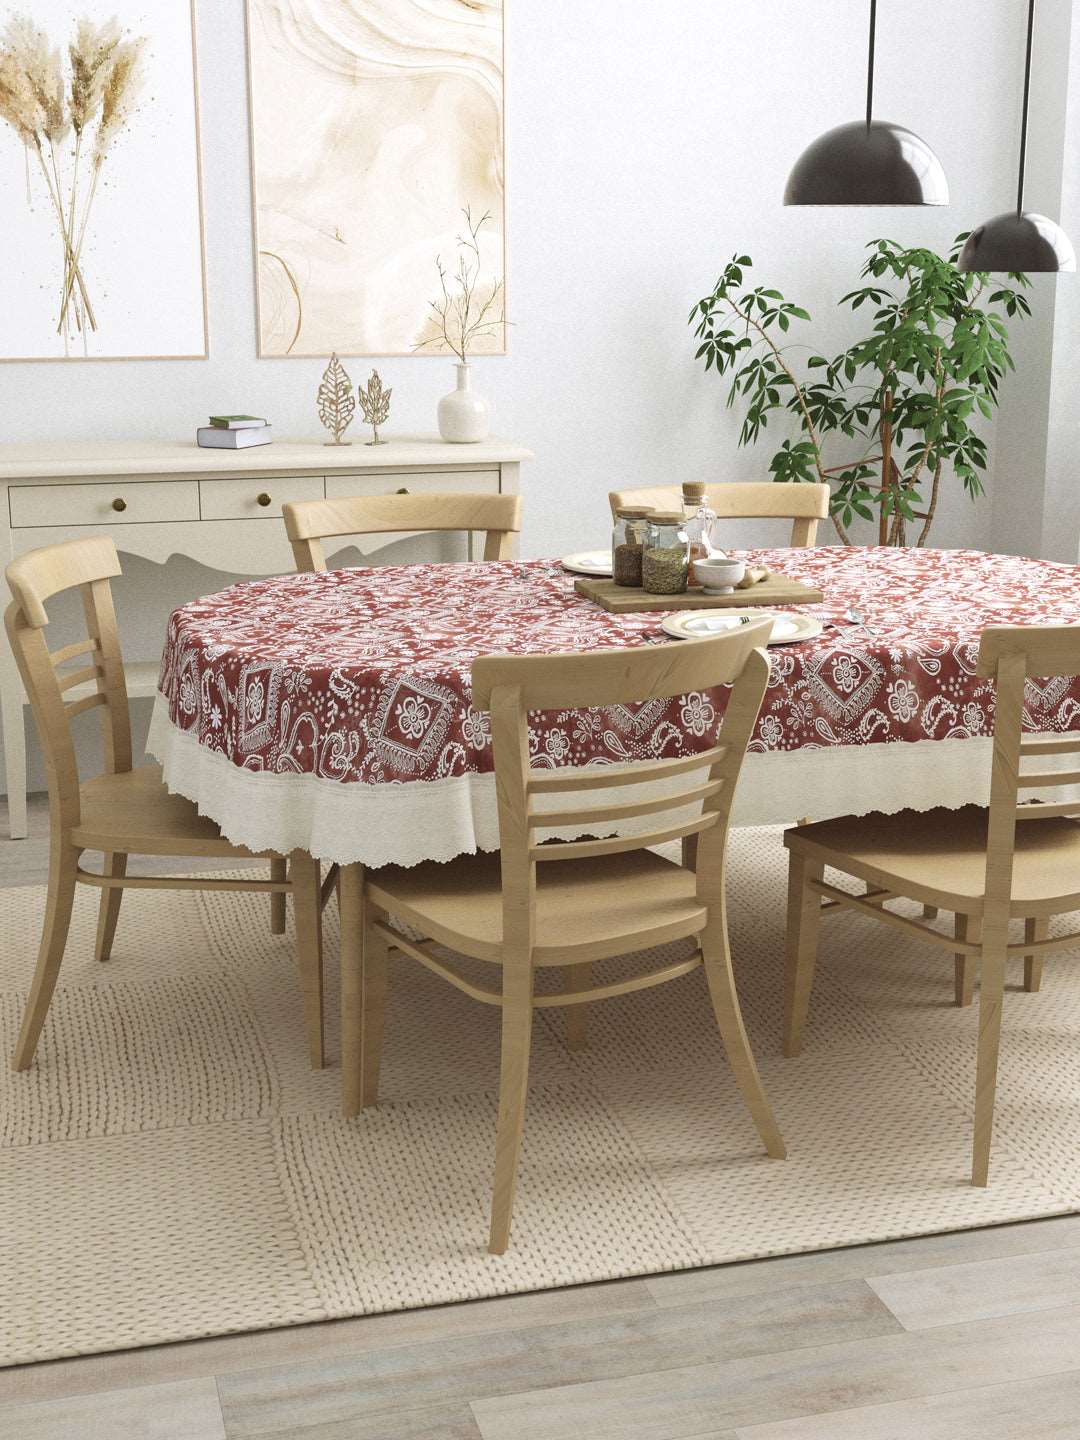 6 Seater Oval Dining Table Cover; 60x90 Inches; Material - PVC; Anti Slip; White Print On Brown